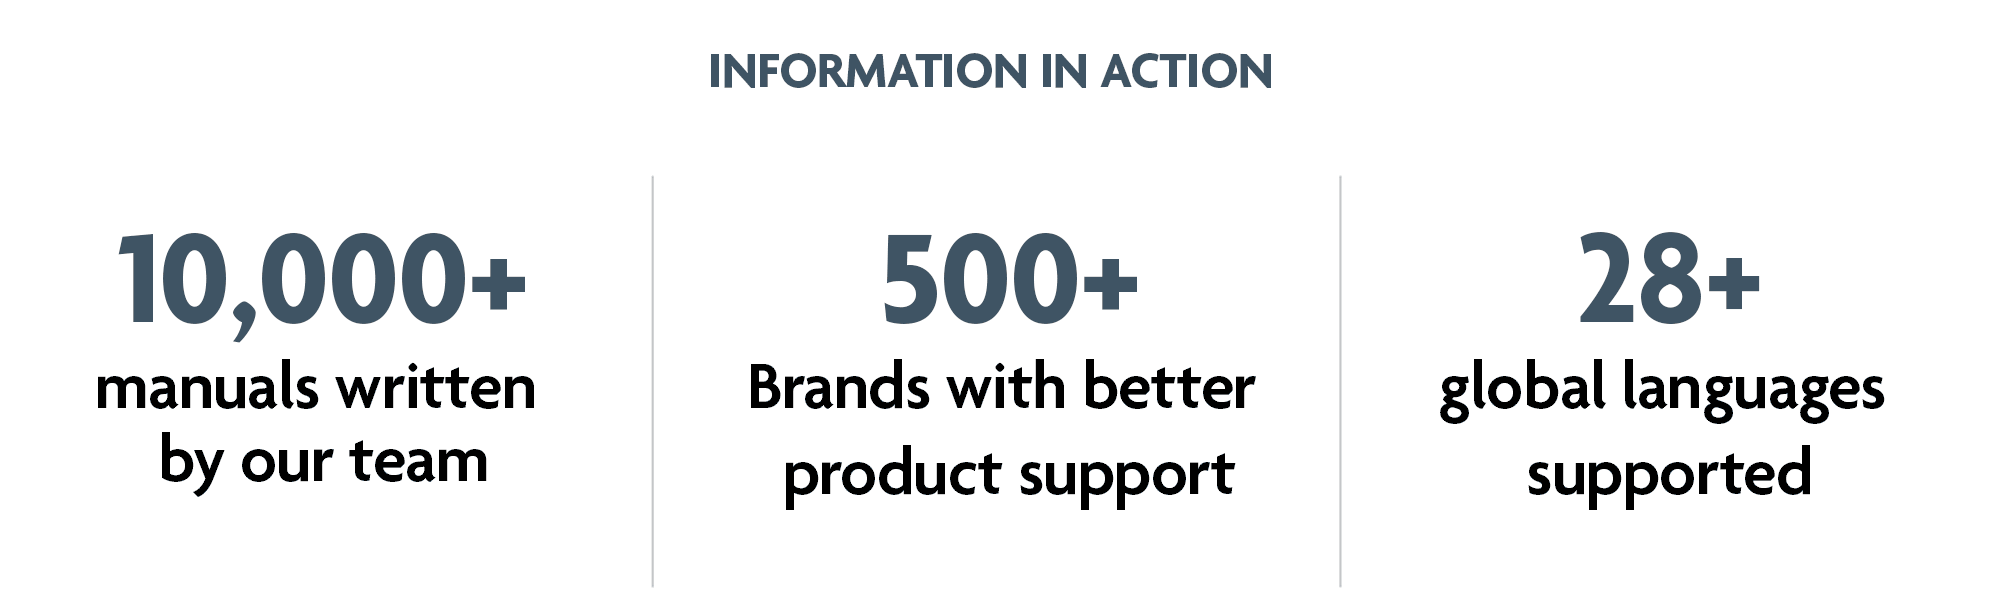 10,000+ manuals written by out team | 500+ brands with better product support | 28+ global languages supported